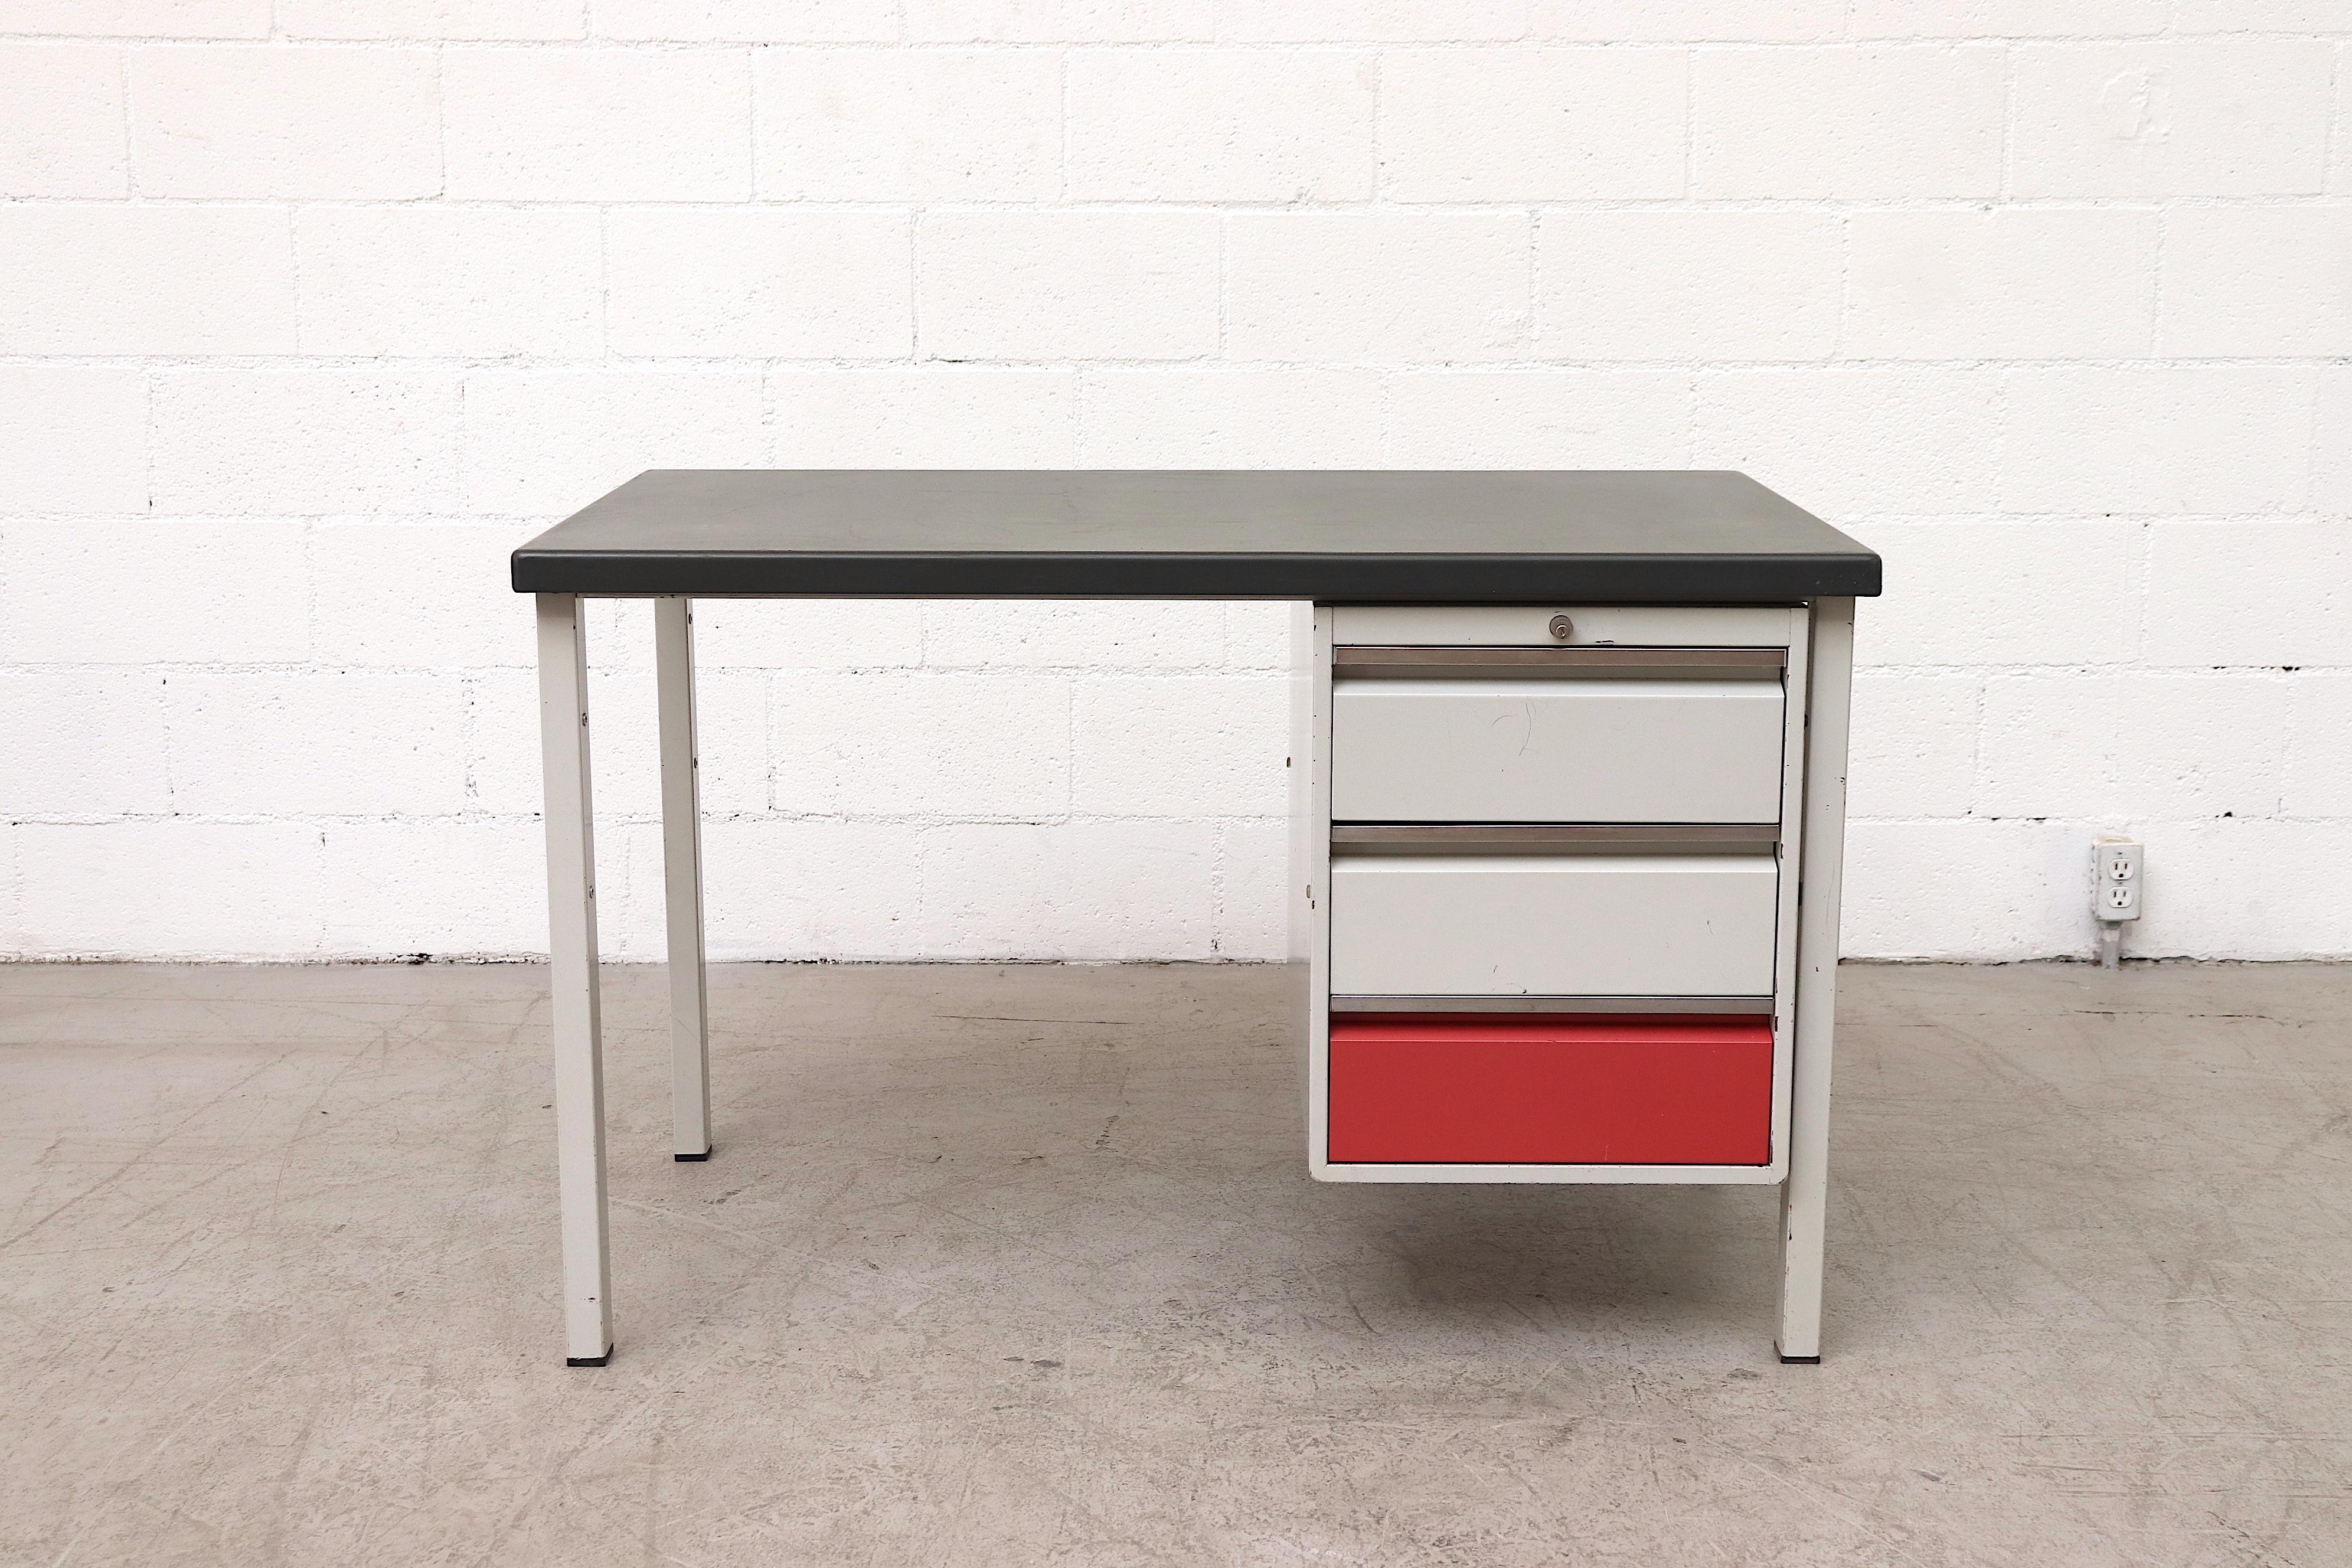 Midcentury industrial metal desk with light grey enameled metal frame. Side stacked red and white enameled metal drawers with grey linoleum top. Original condition with visible wear, some scratching and metal loss. Wear is consistent with age and